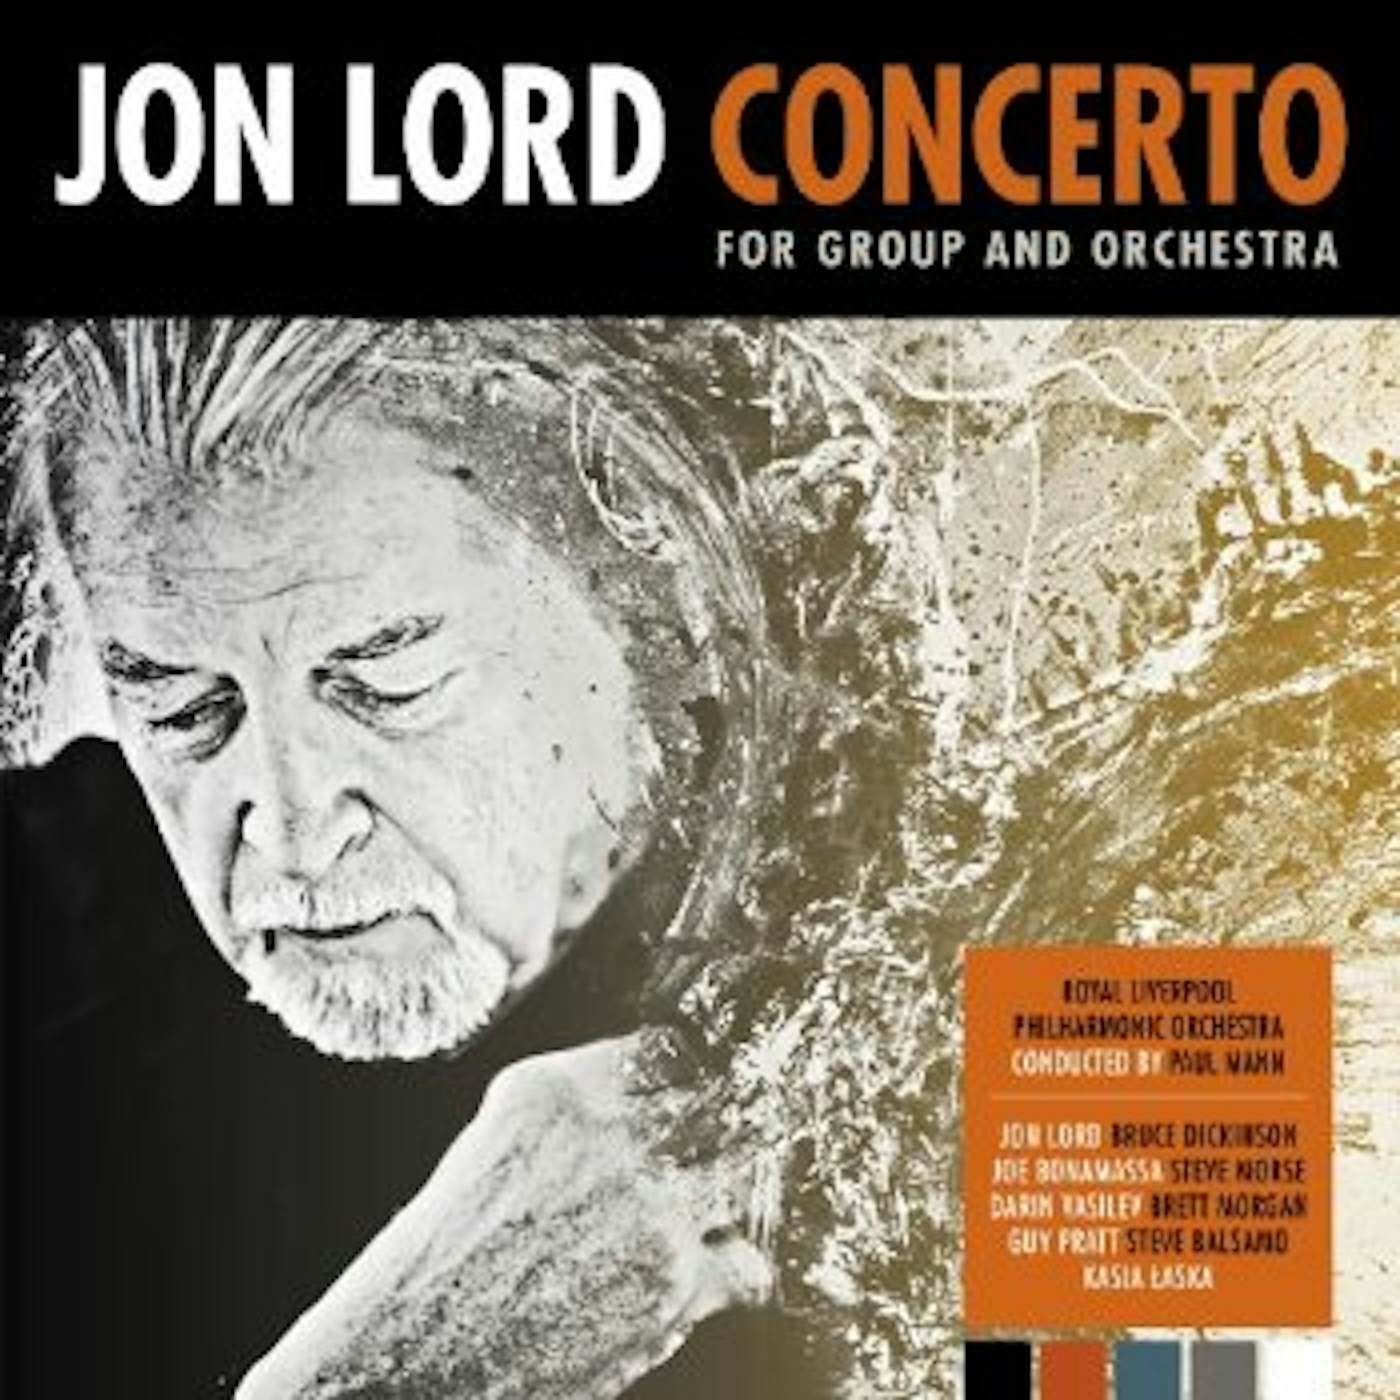 Jon Lord CONCERTO FOR GROUP (Vinyl)